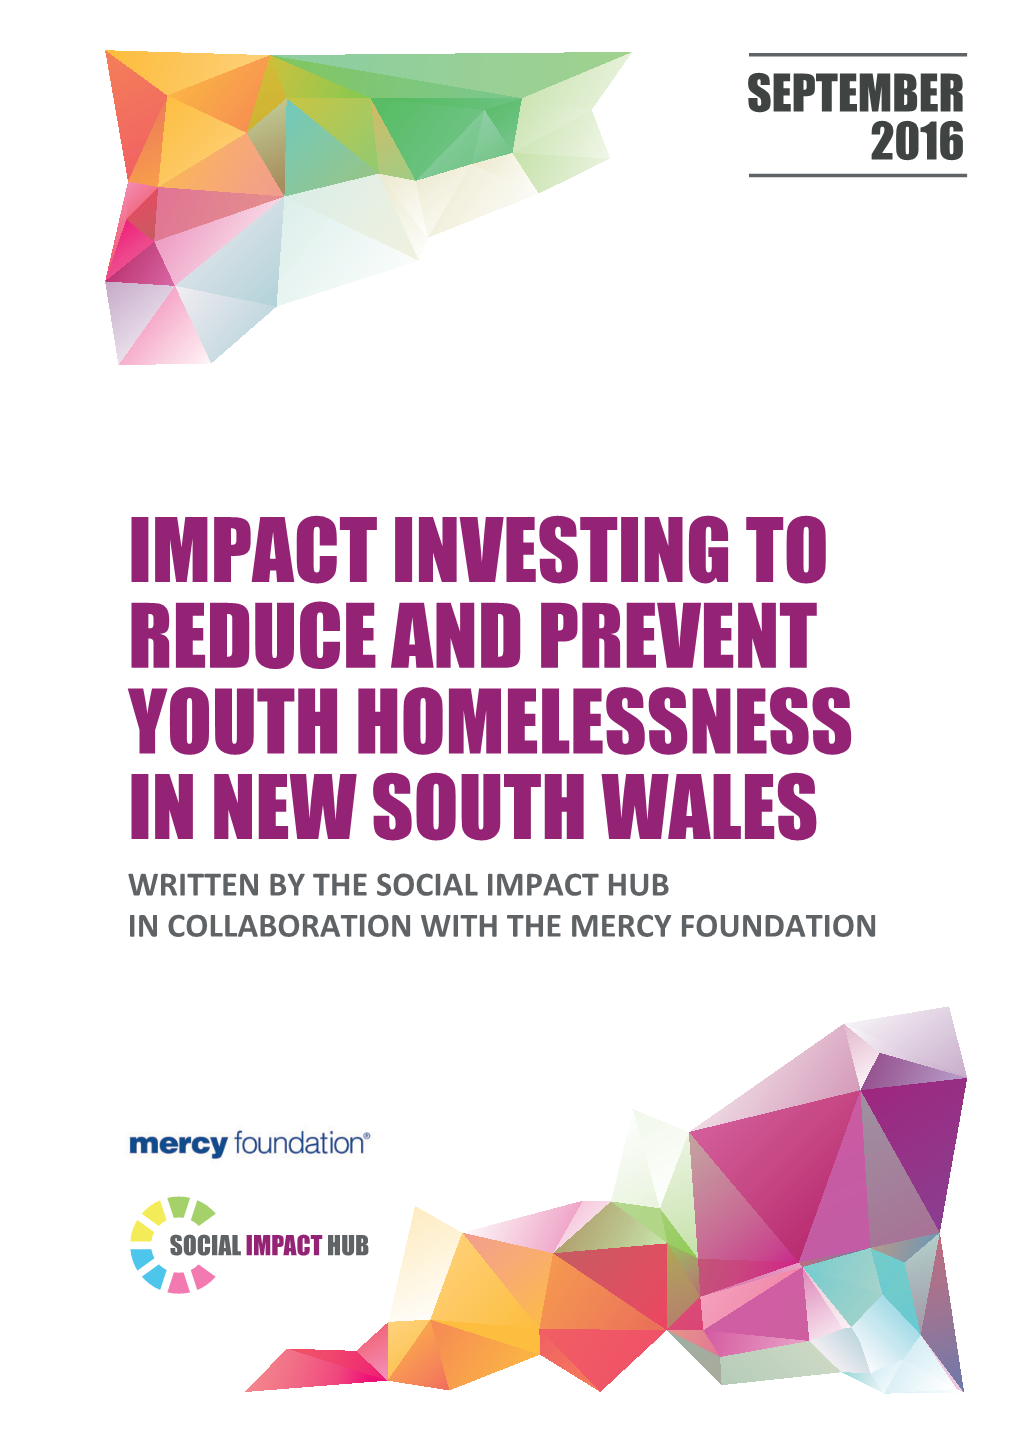 Impact Investing to Reduce and Prevent Youth Homelessness in New